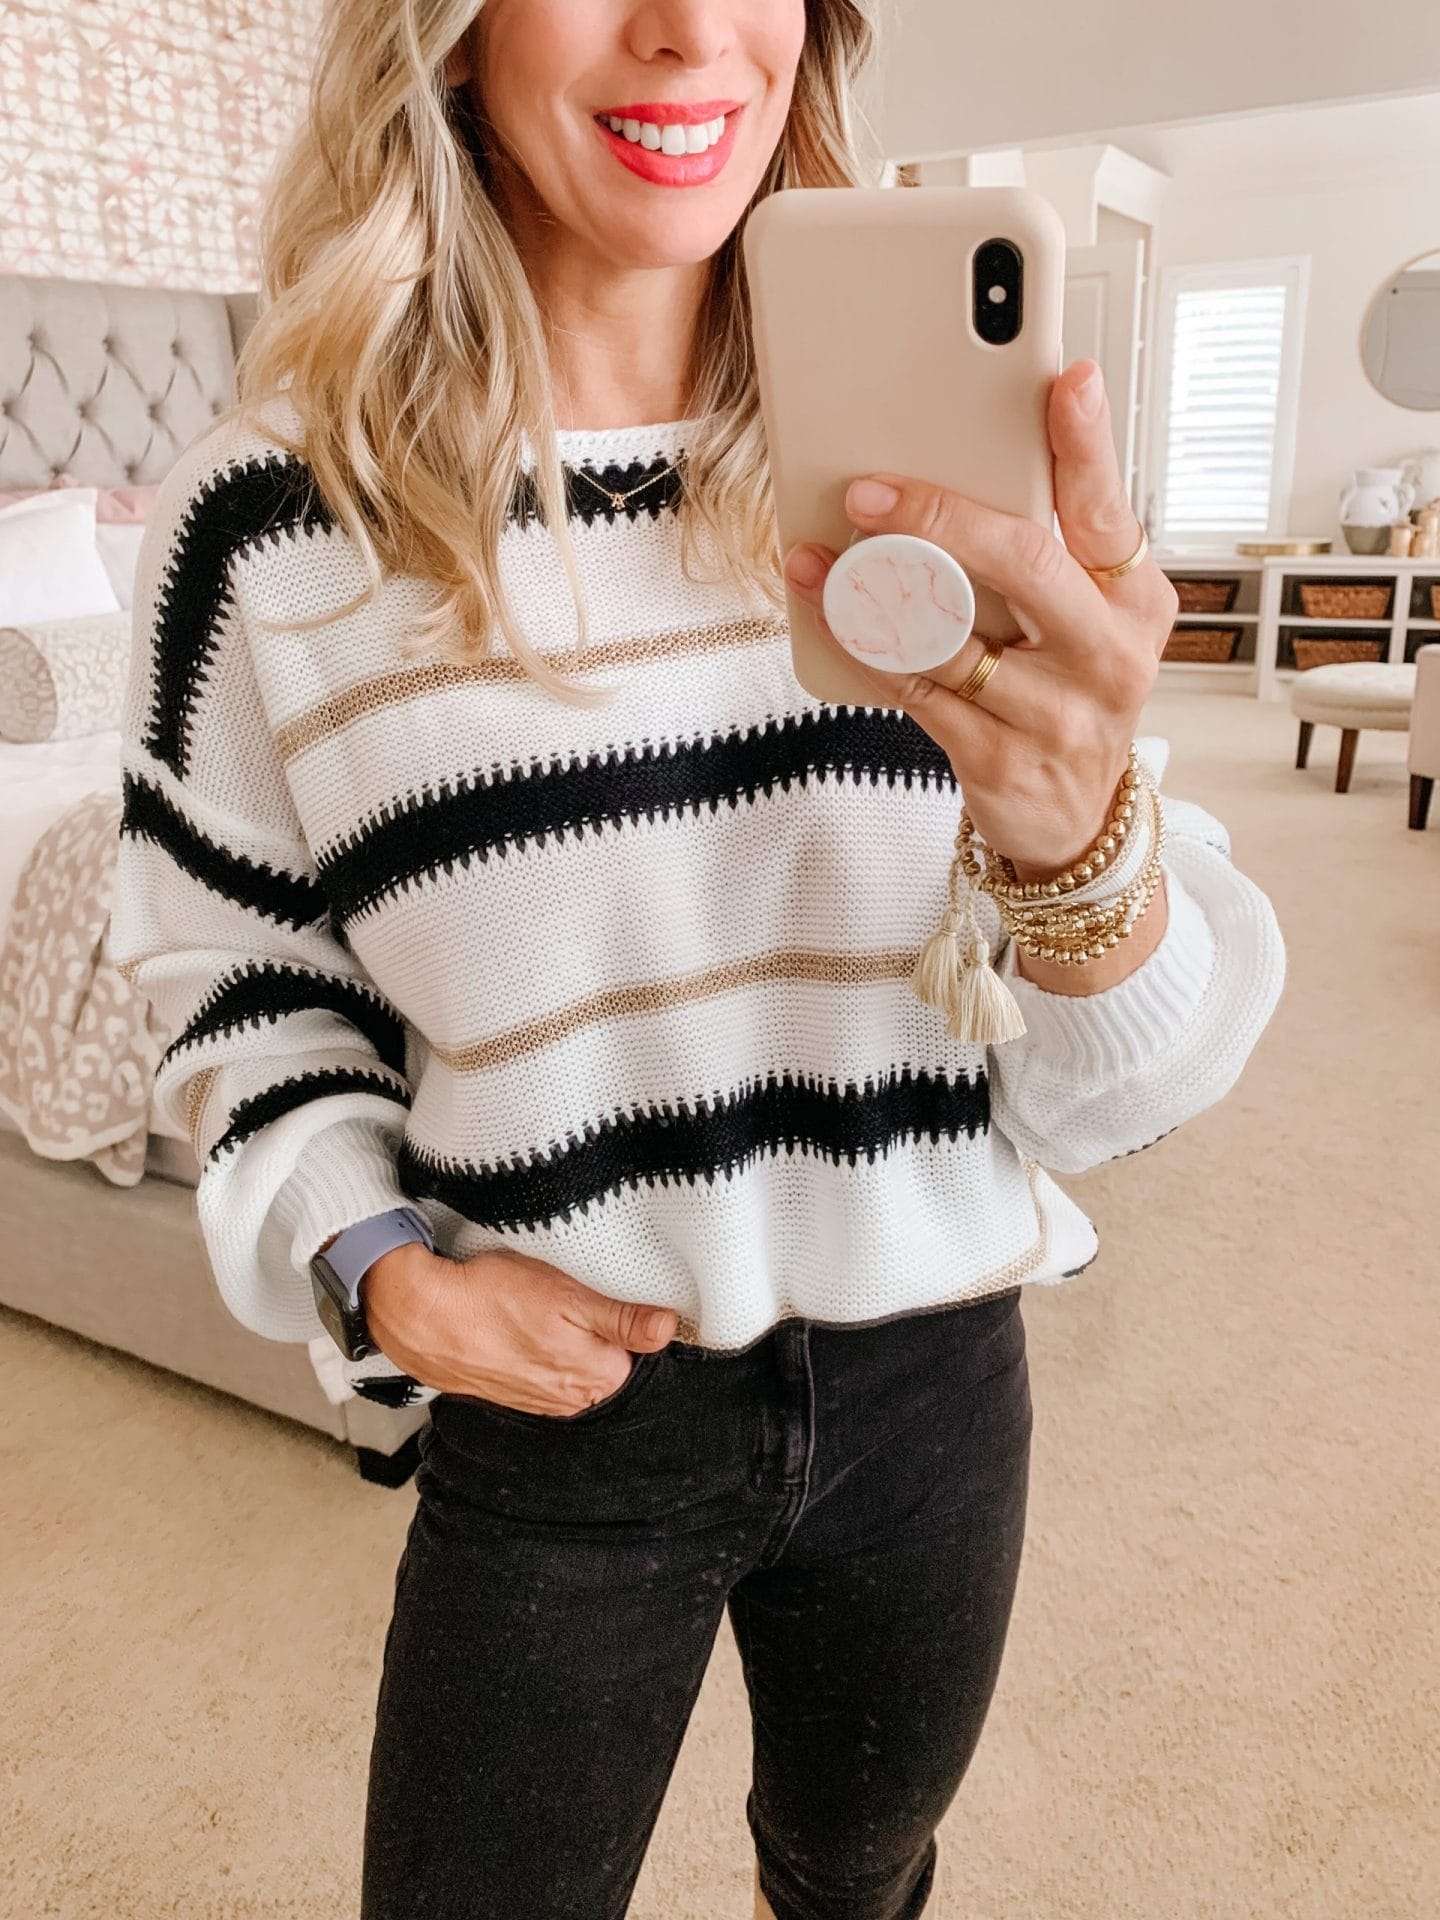 Amazon Fashion Finds, Striped Sweater, Jeans, Boots 